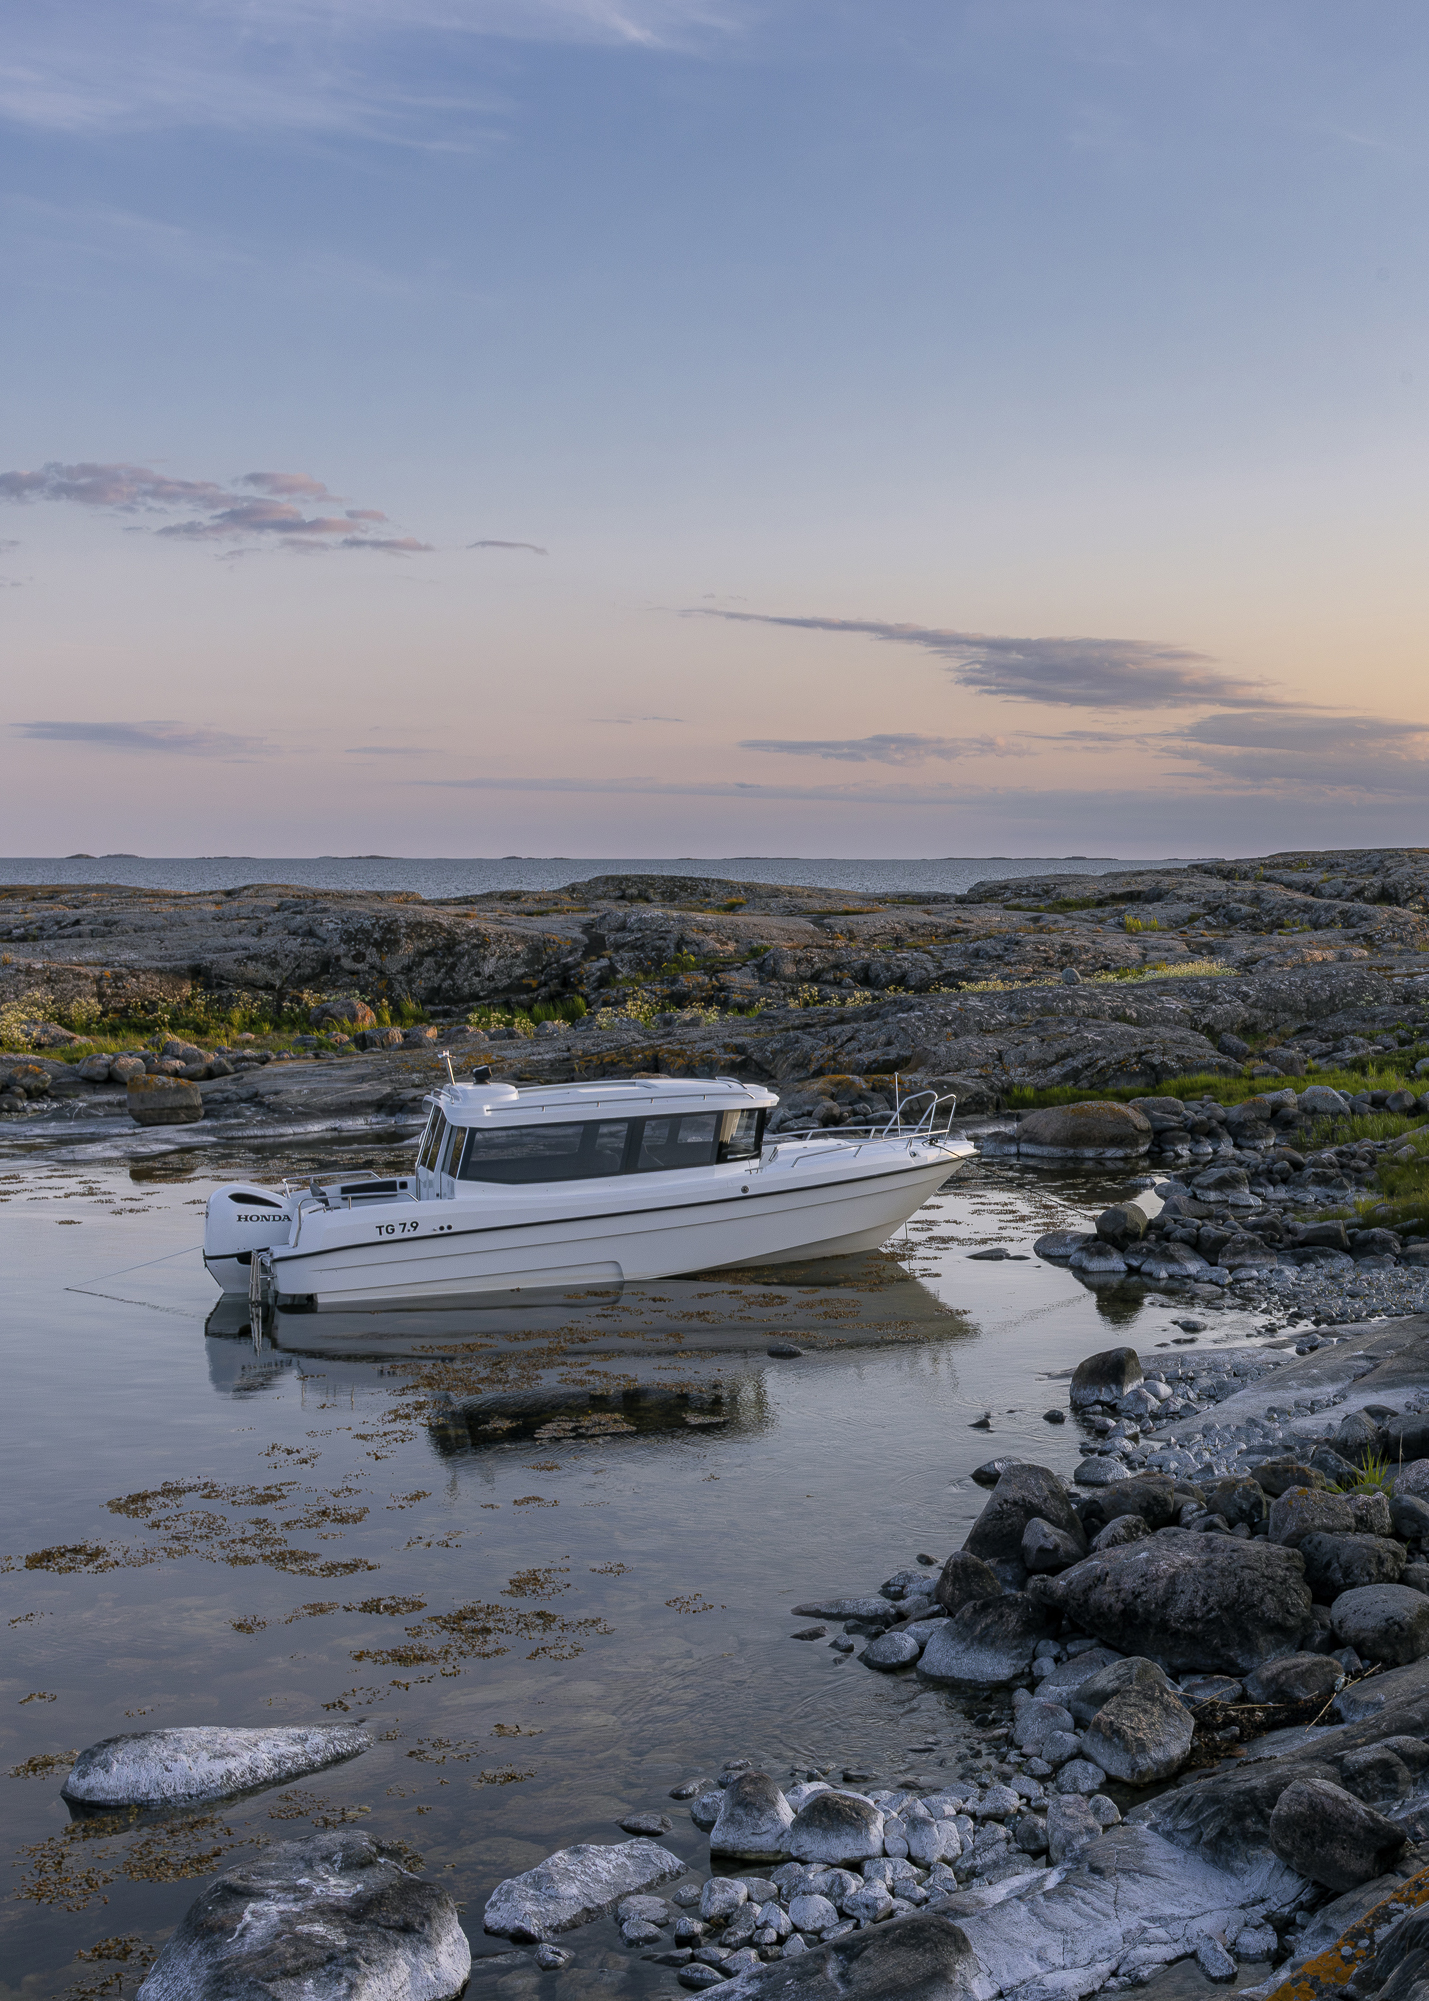 TG 7.9 cabin boat anchored in beaufitul, serene natural harbor in the outer Finnish archipelago at sunset.